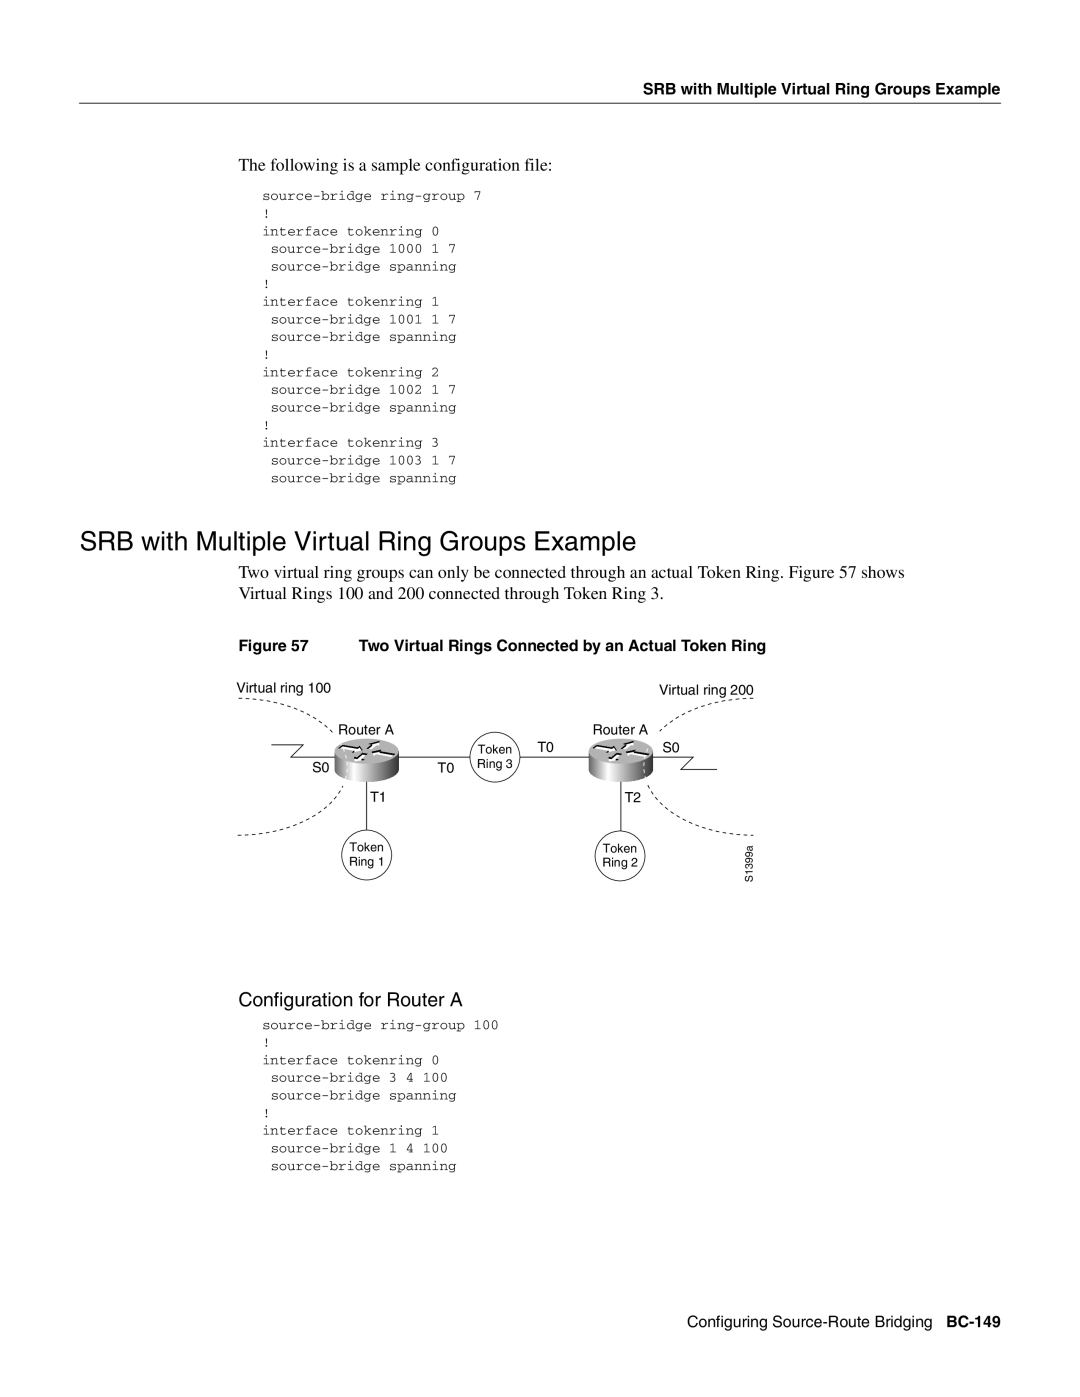 Cisco Systems BC-109 SRB with Multiple Virtual Ring Groups Example, Configuration for Router A, source-bridge ring-group 